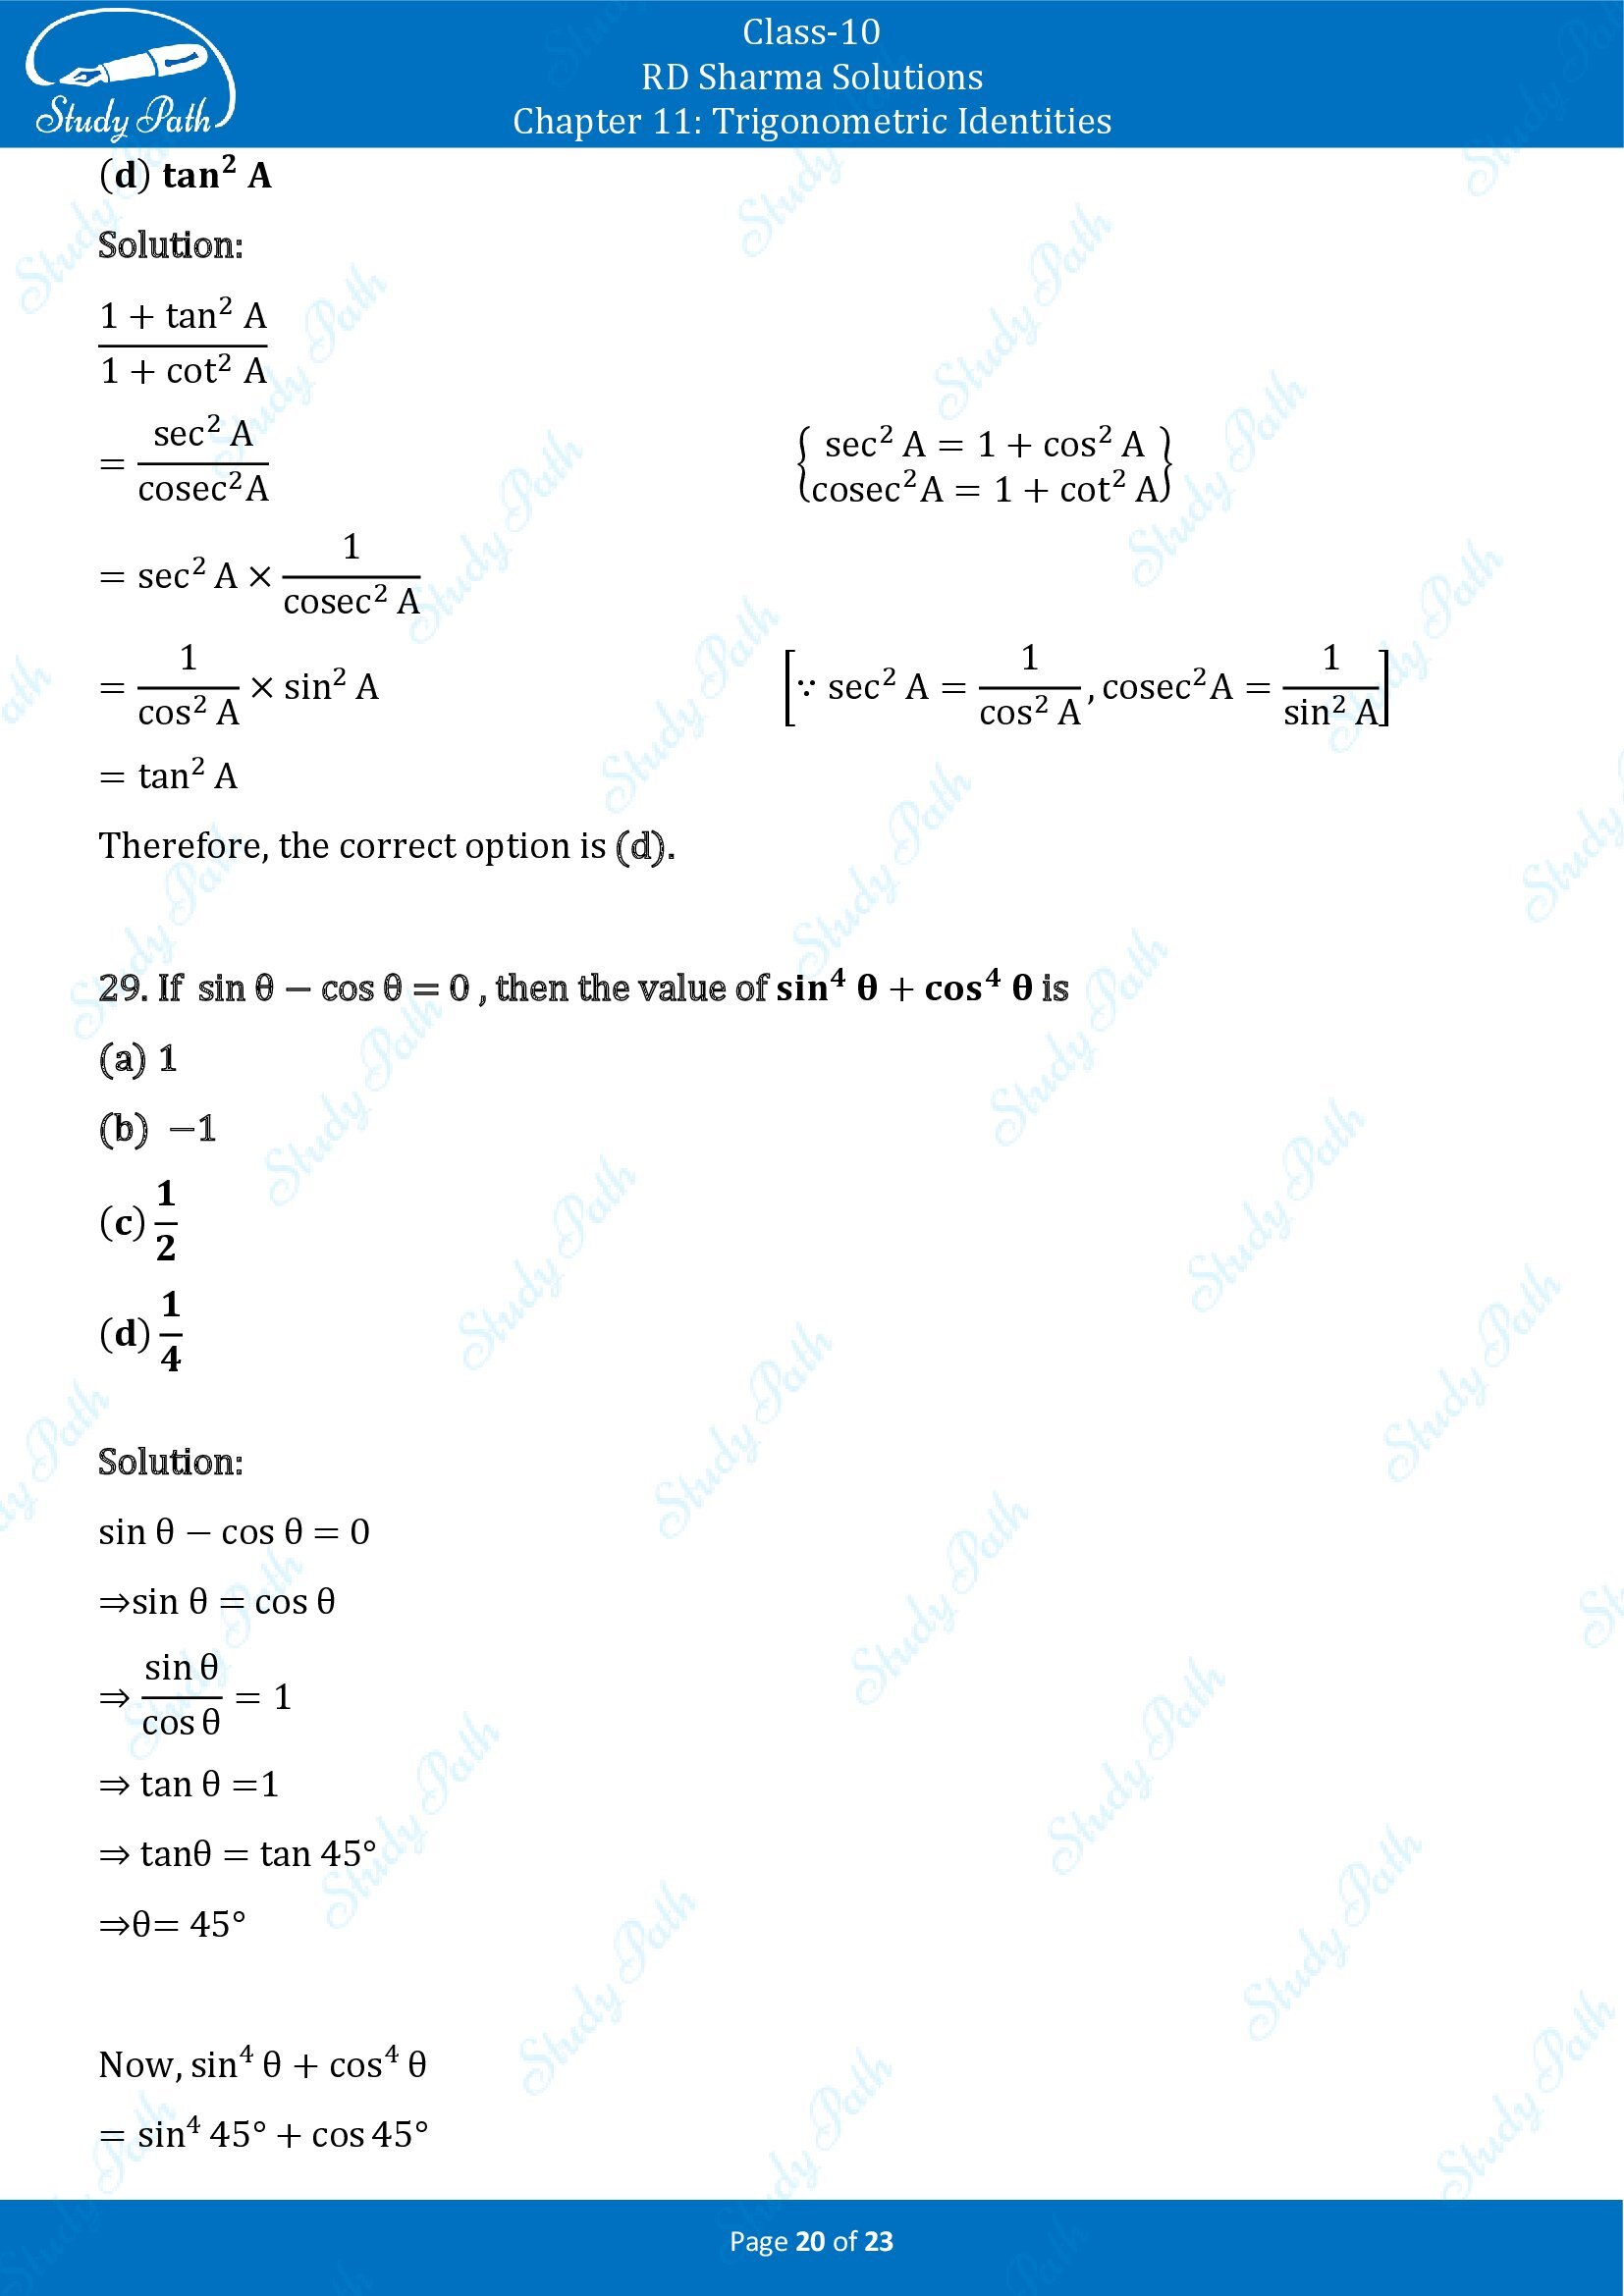 RD Sharma Solutions Class 10 Chapter 11 Trigonometric Identities Multiple Choice Questions MCQs 00020